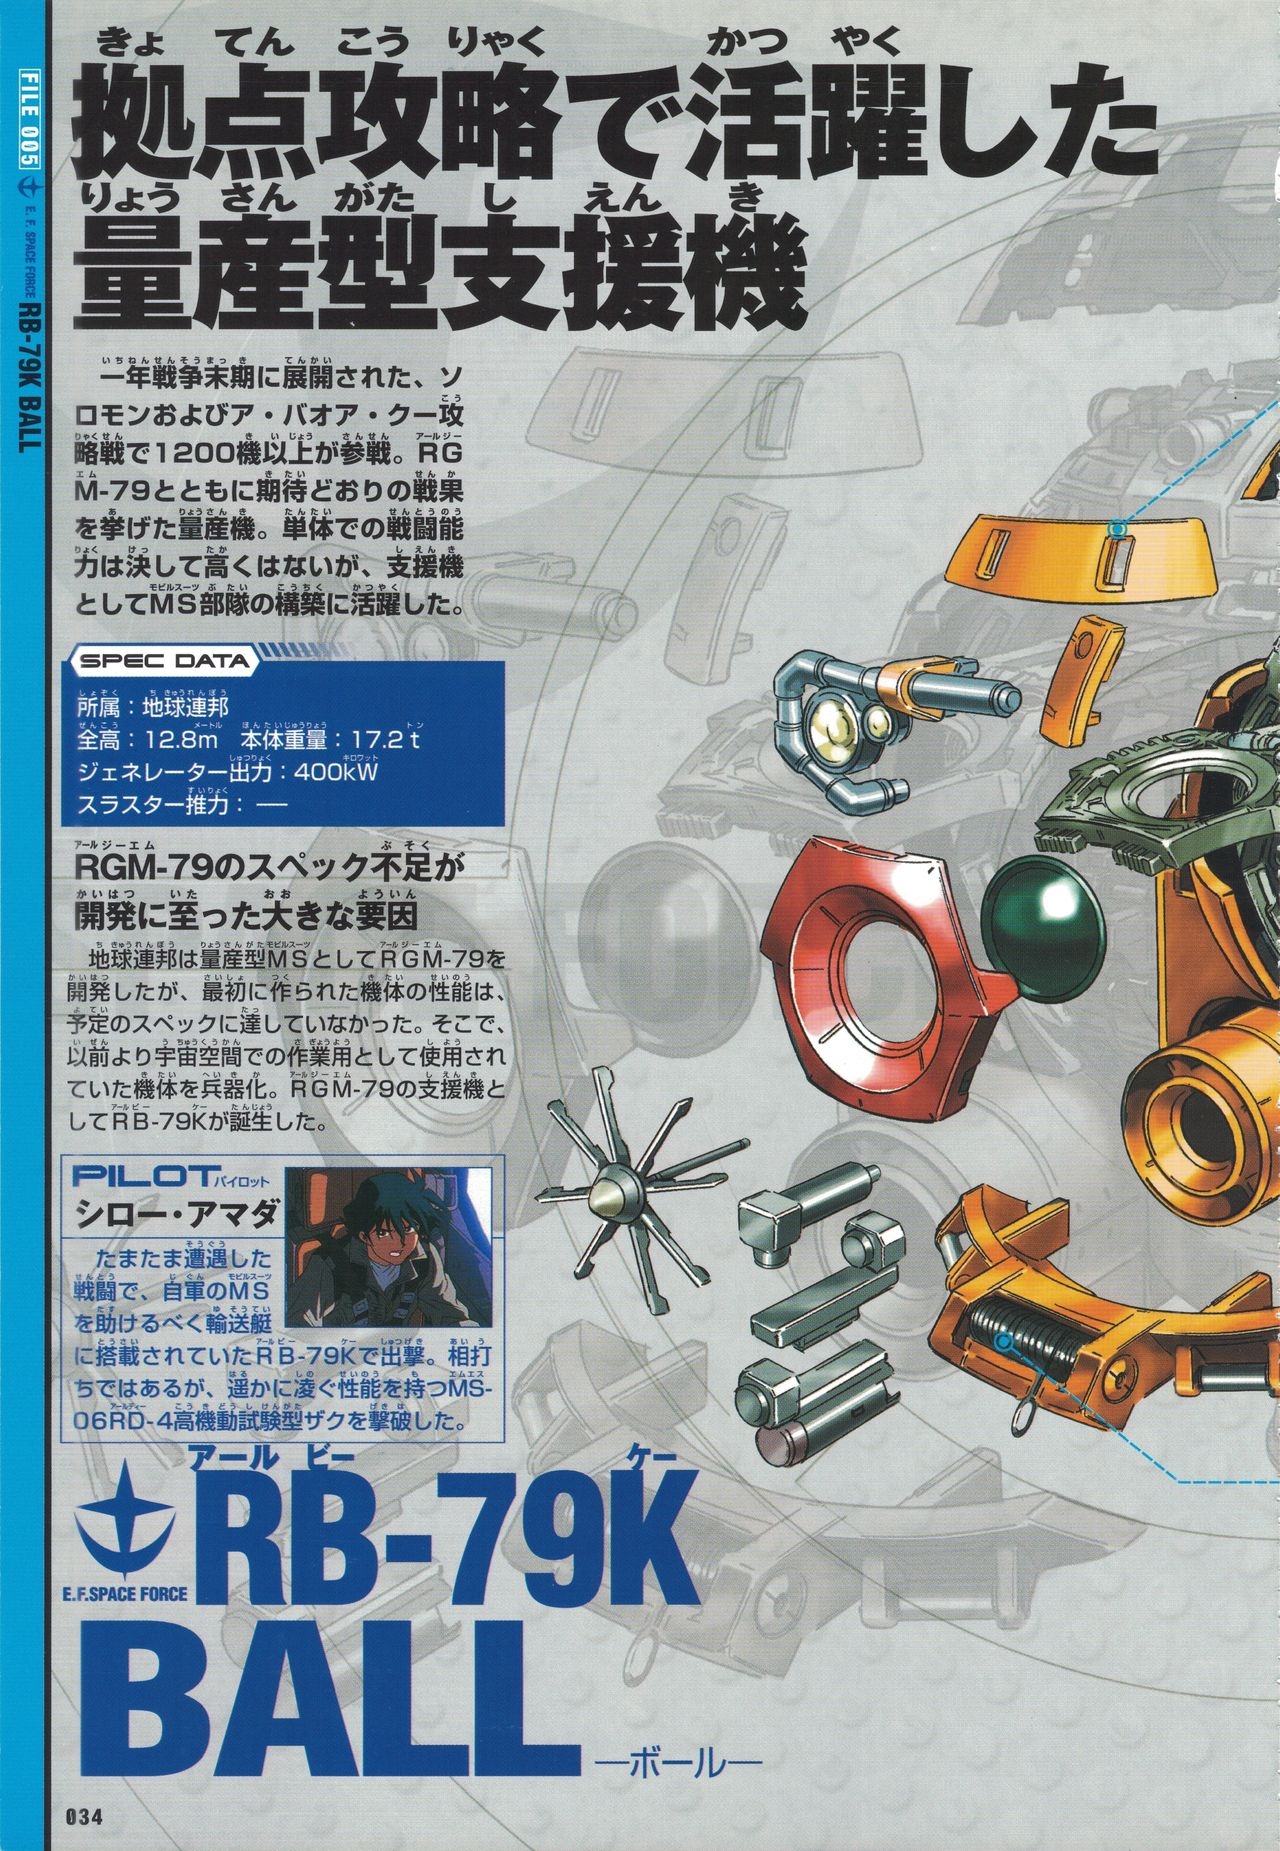 Mobile Suit Gundam - New Cross-Section Book - One Year War Edition 36